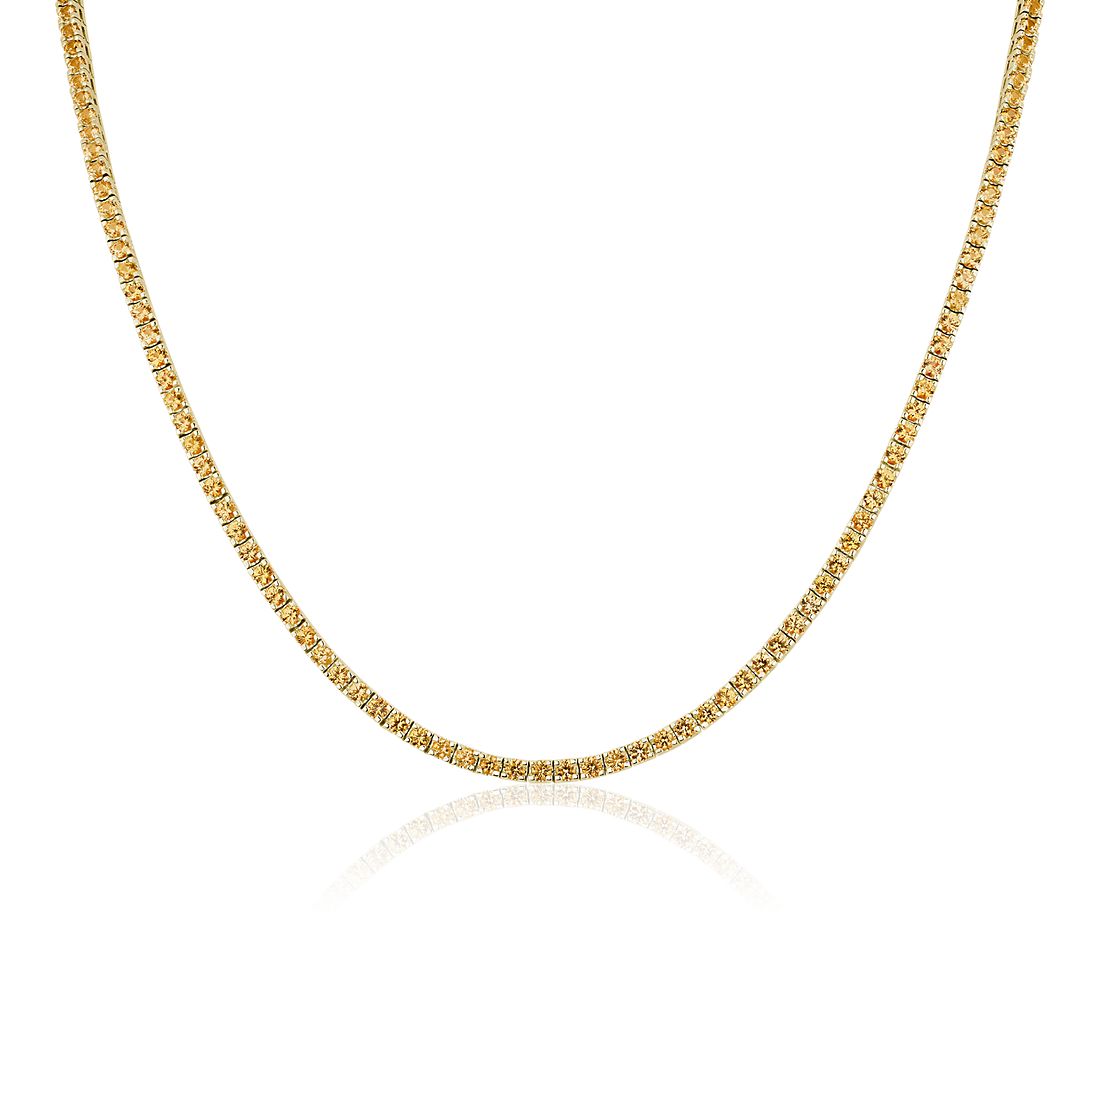 Yellow Sapphire Eternity Necklace in 14k Yellow Gold